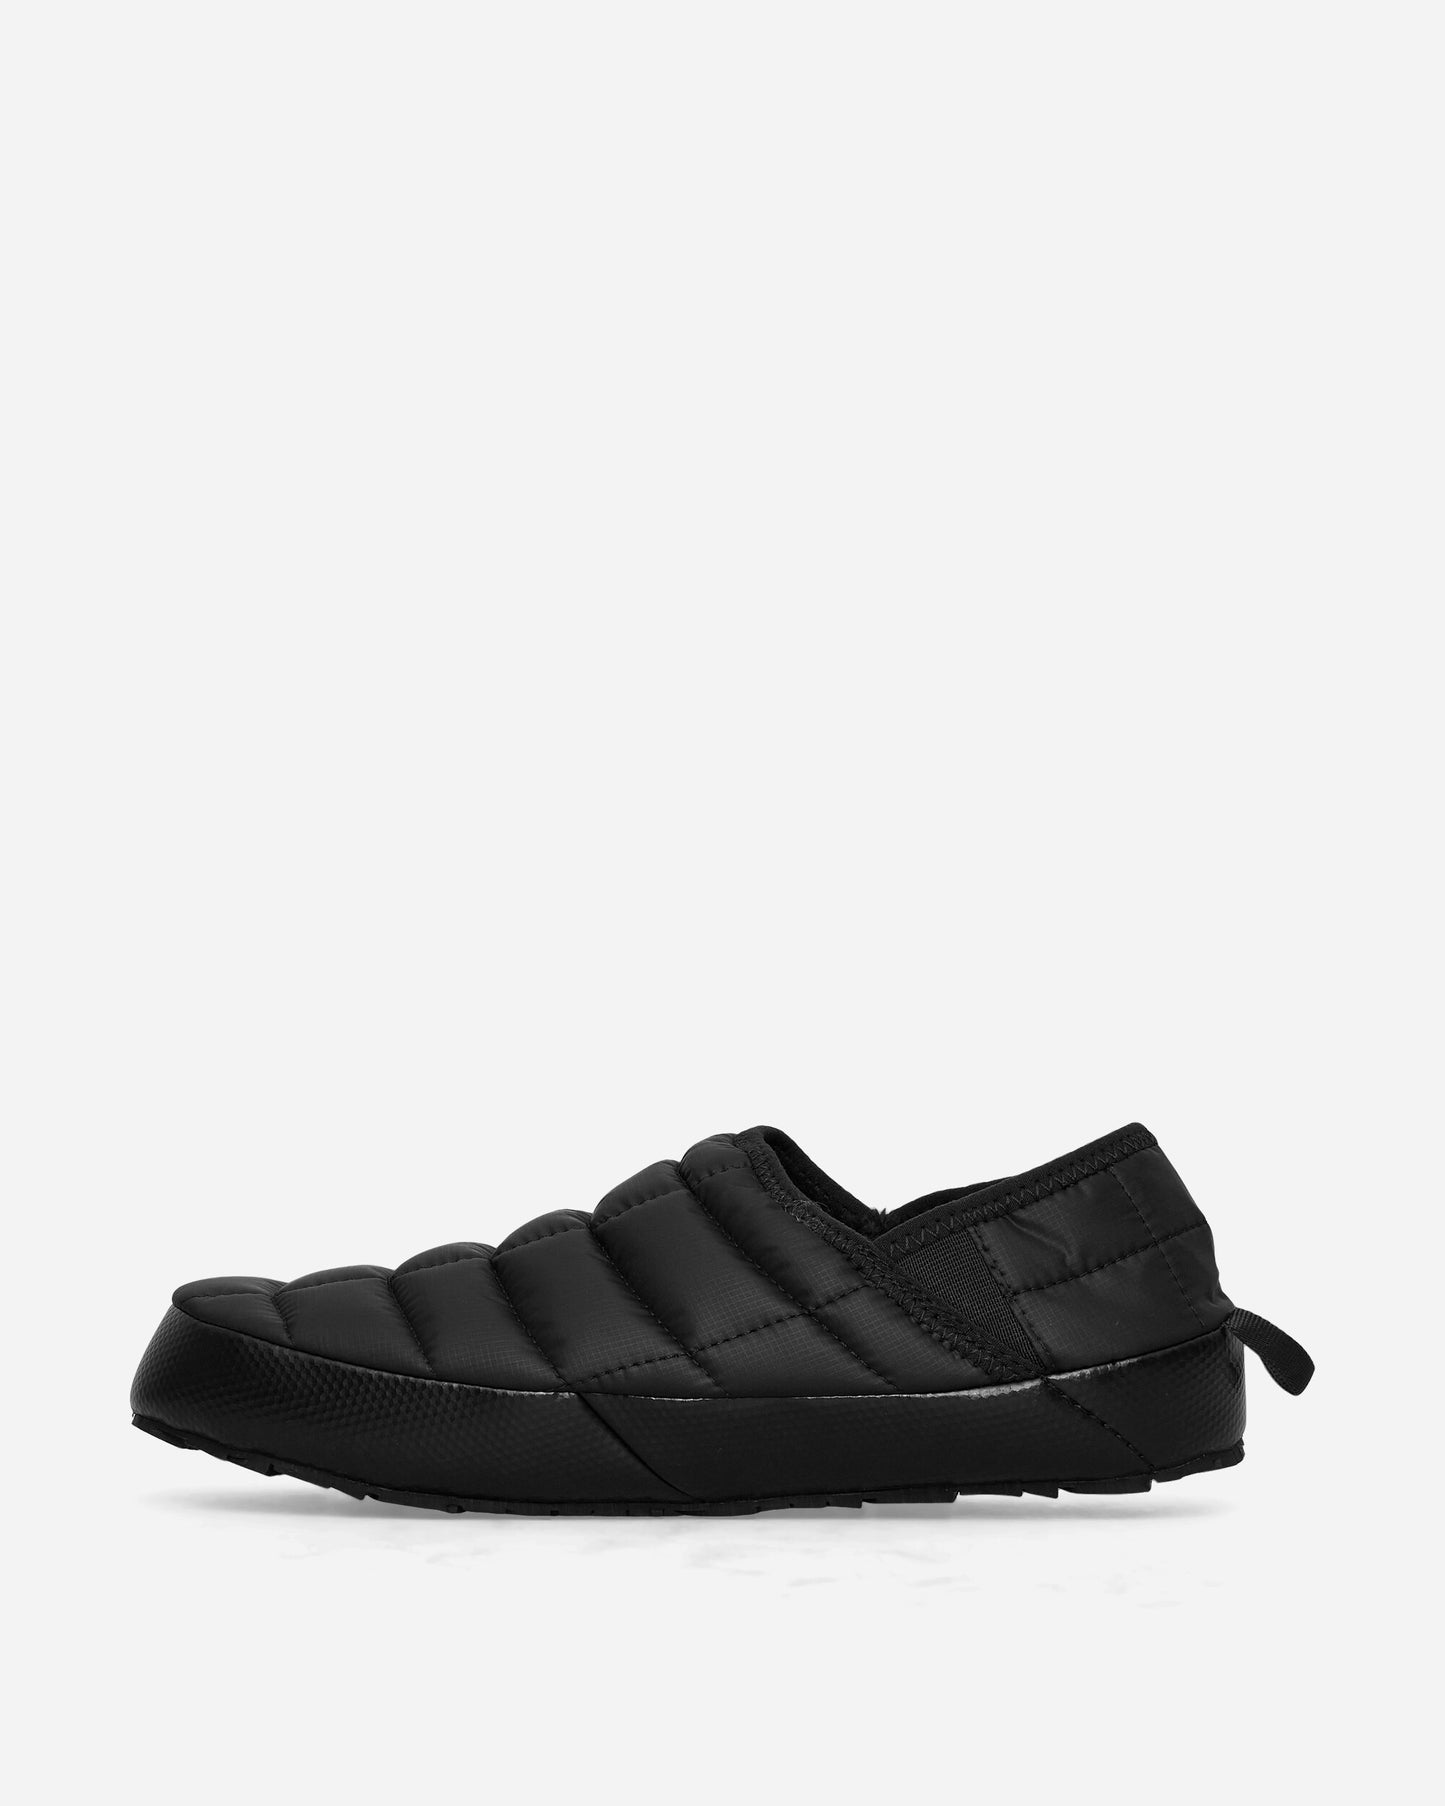 The North Face M Thermoball Traction Mule V Tnf Black/Tnf White Sandals and Slides Sandals and Mules NF0A3UZN KY41